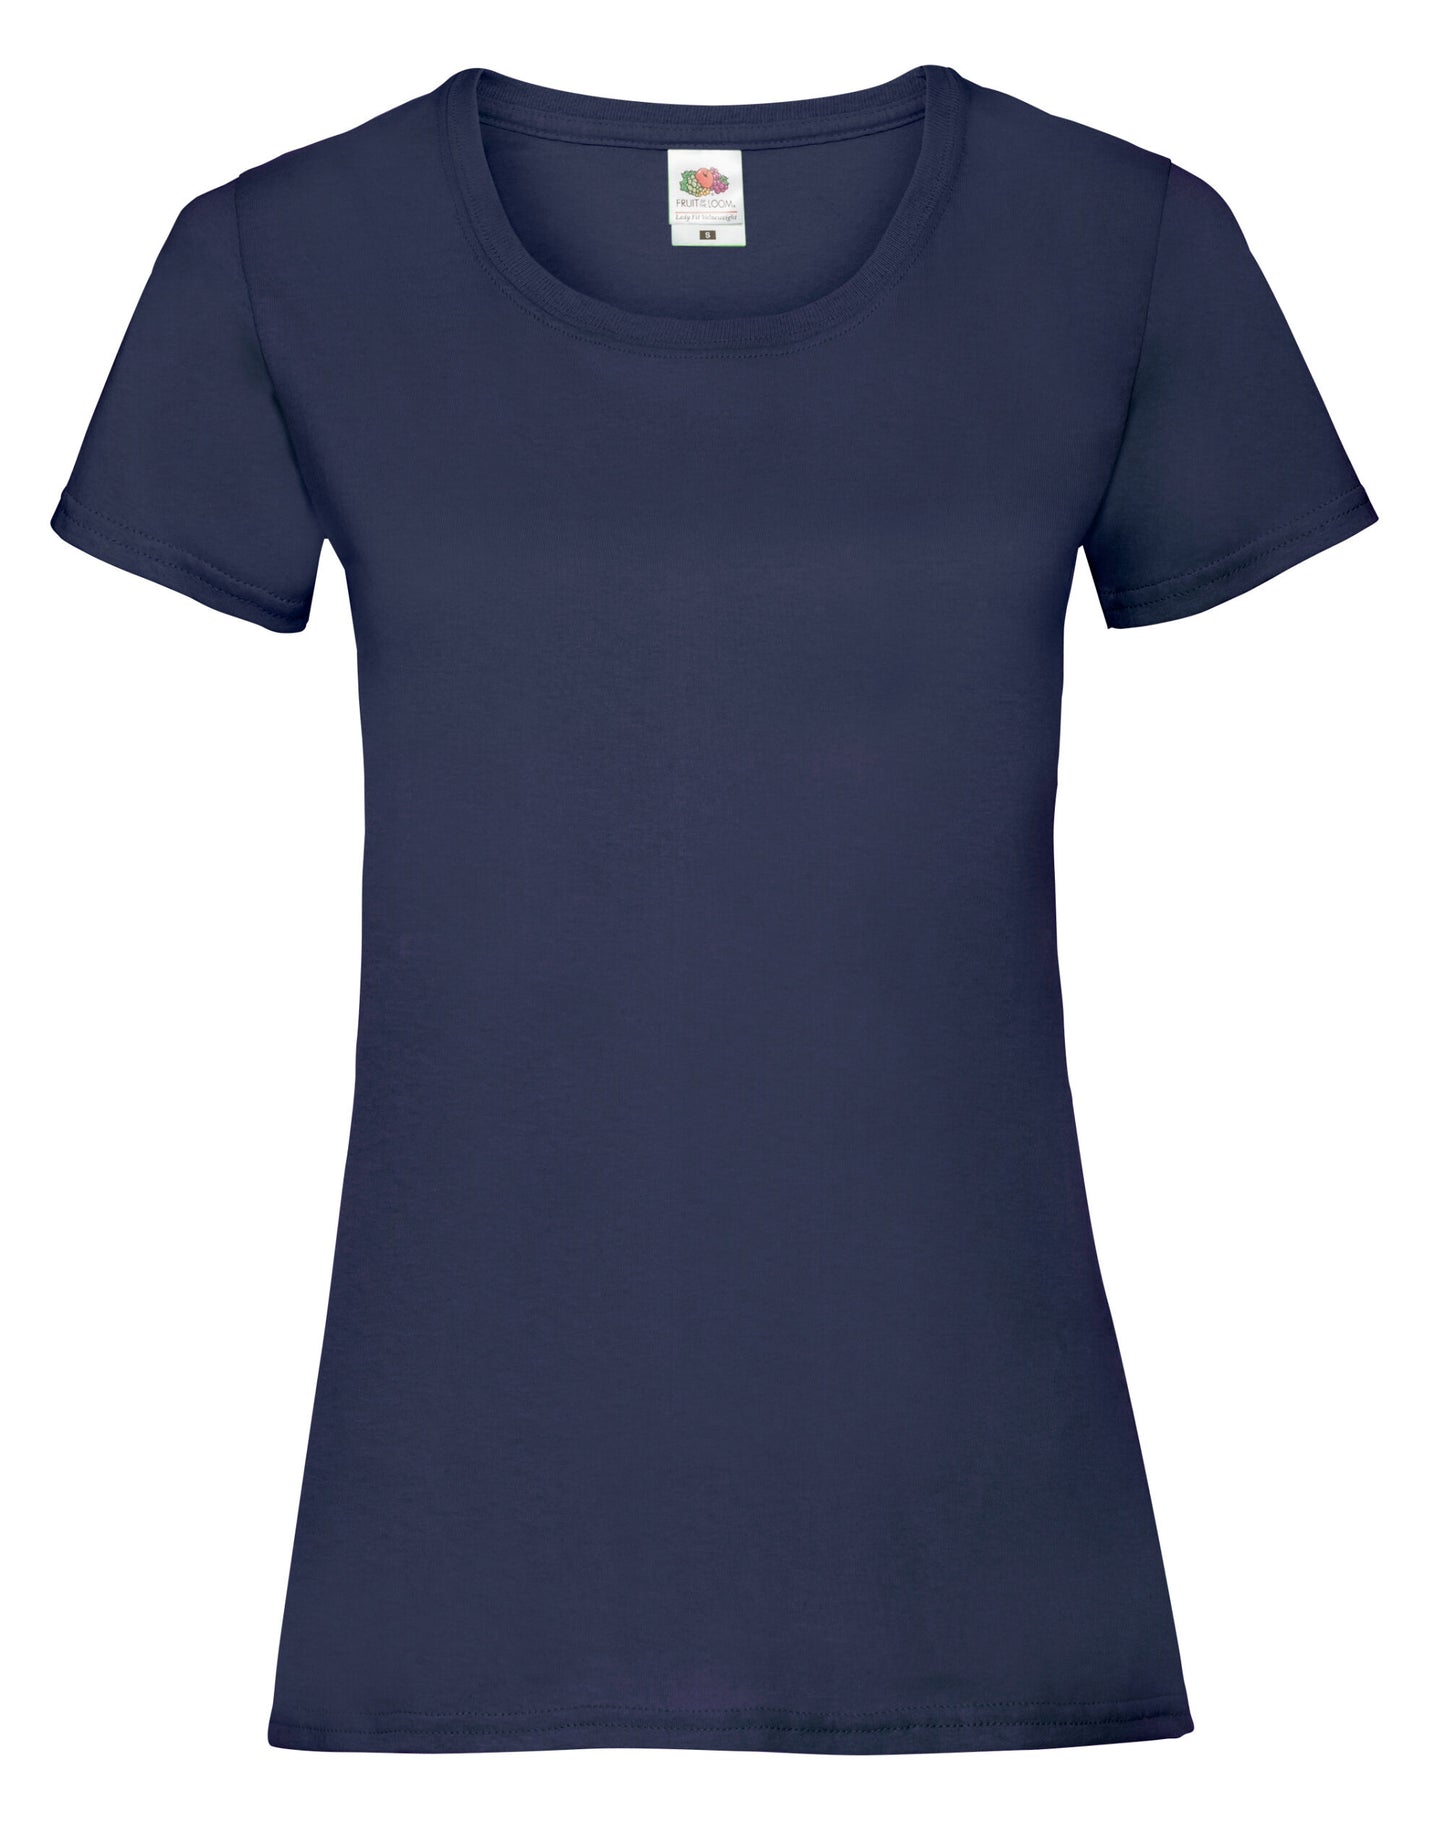 Fruit of the Loom New Lady-Fit Valueweight T